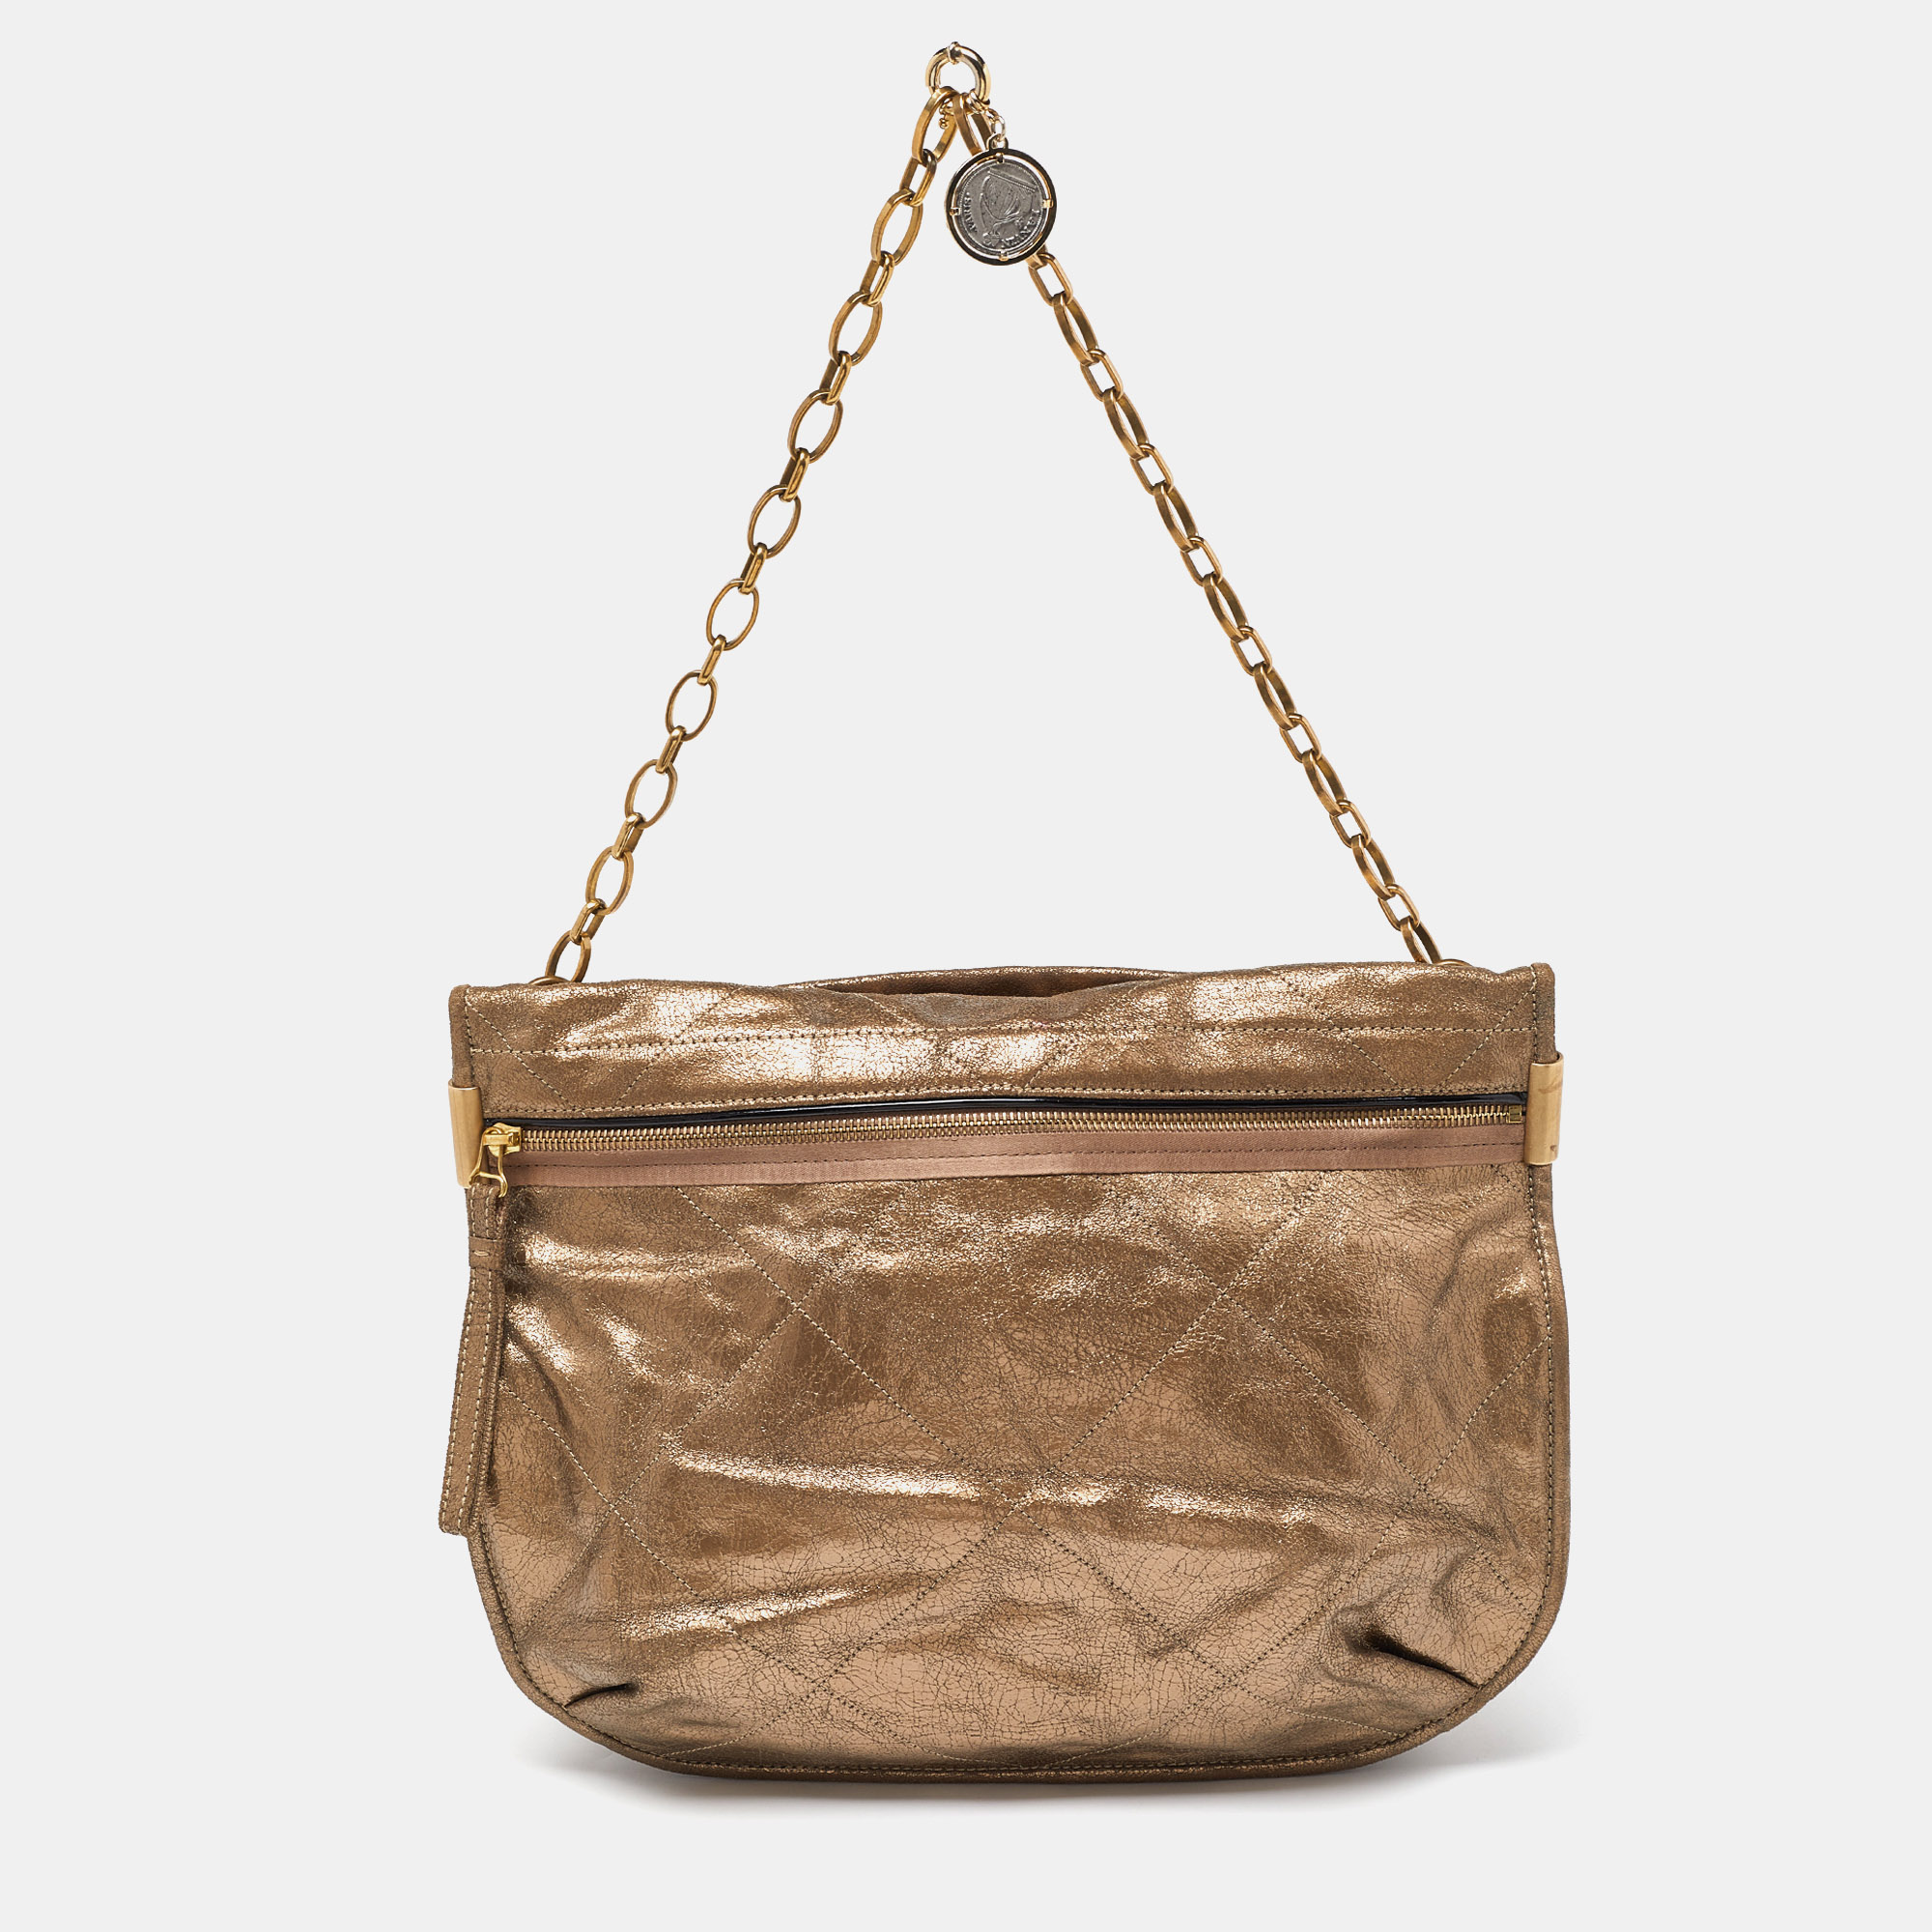 Pre-owned Lanvin Metallic Gold Leather Chain Hobo